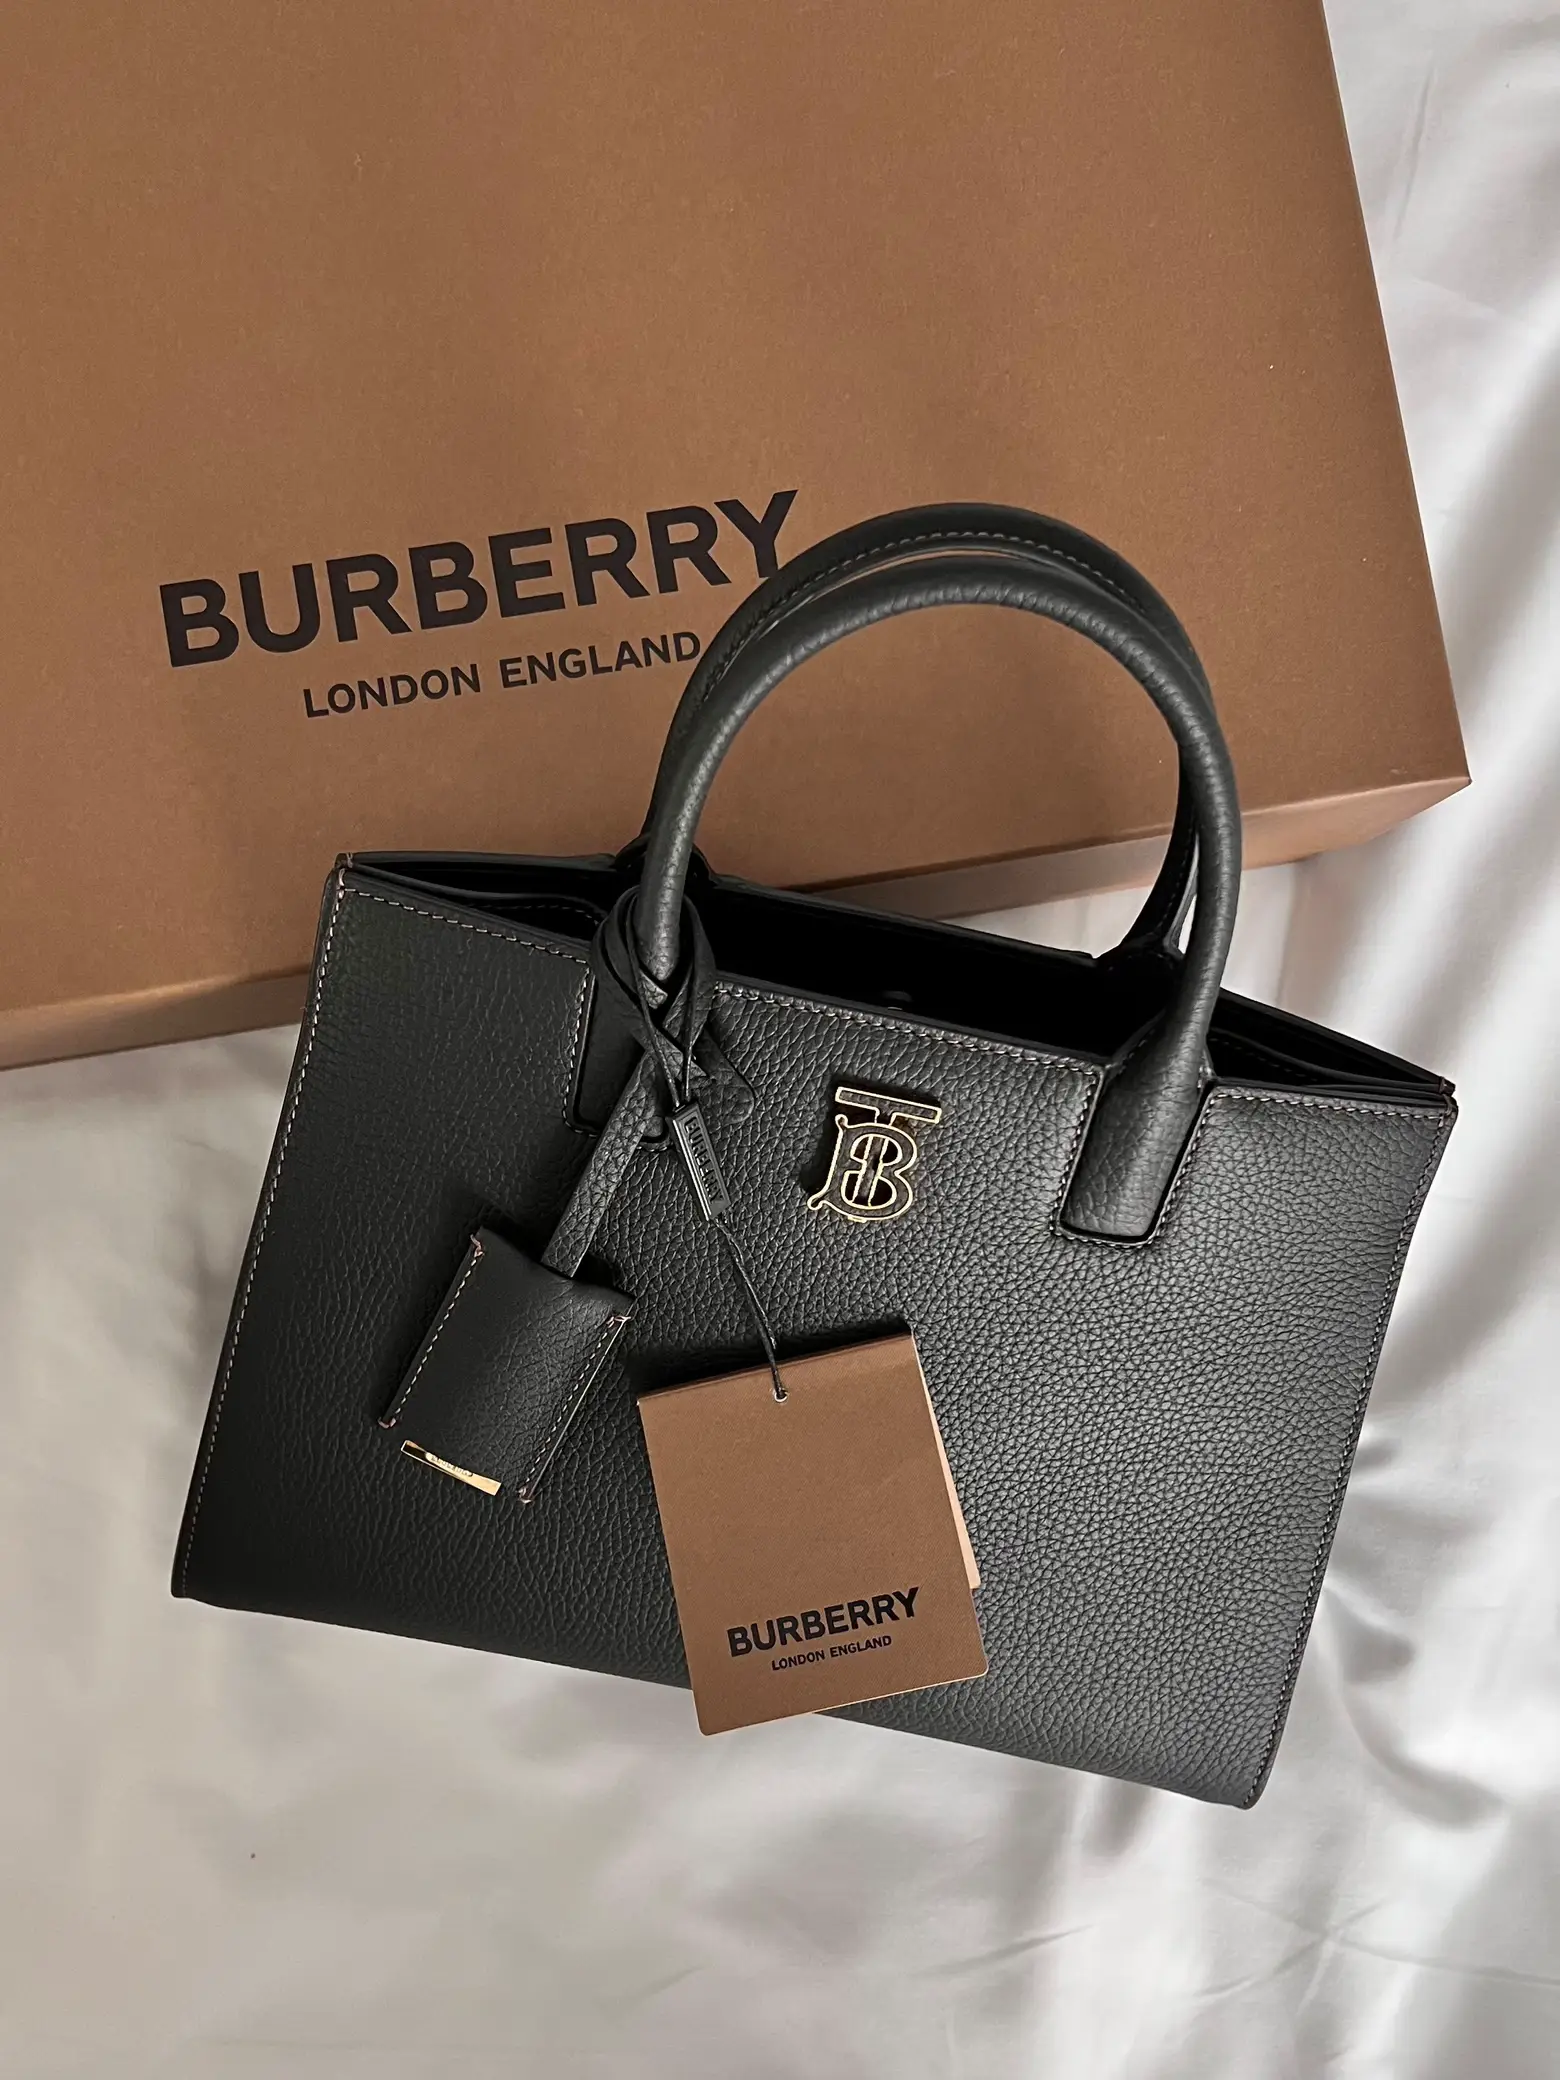 BURBERRY Leather Check Tote in Olive - More Than You Can Imagine